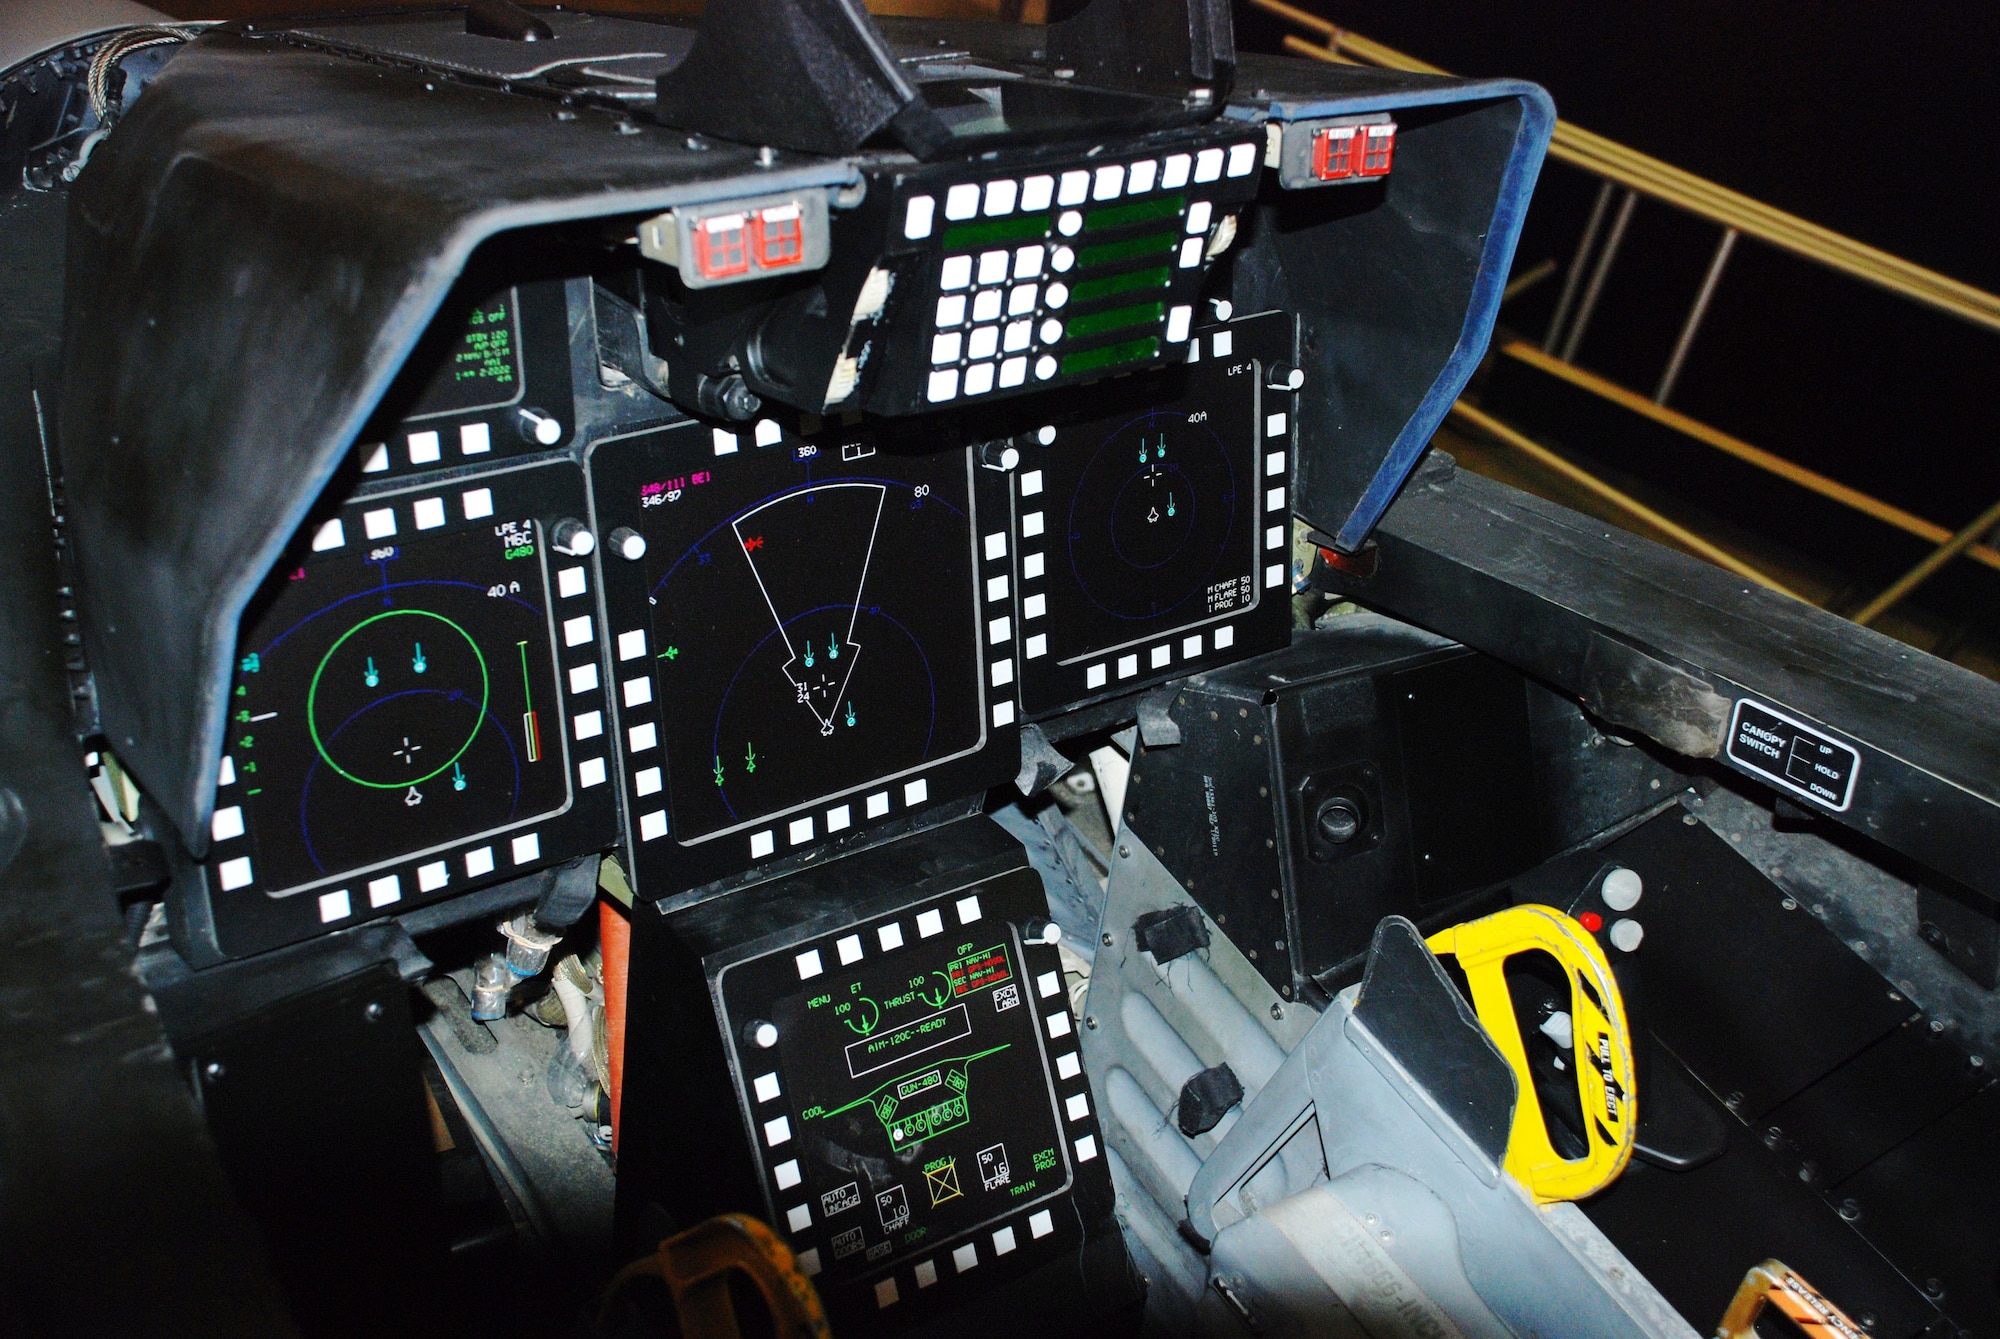 DAYTON, Ohio - Lockheed Martin F-22A Raptor cockpit at the National Museum of the U.S. Air Force. (U.S. Air Force photo)